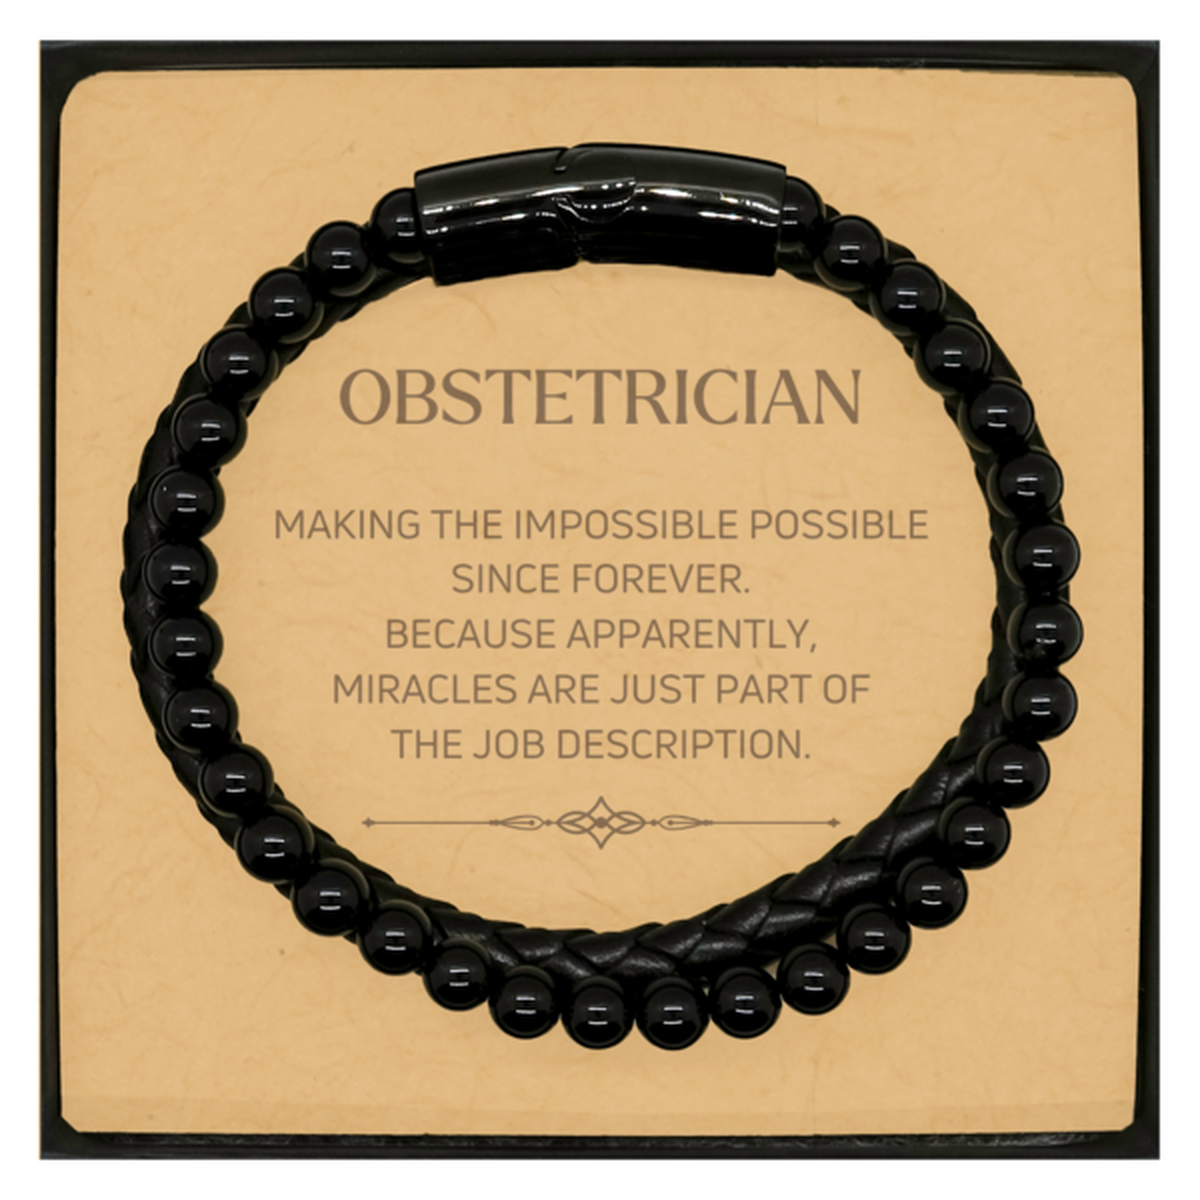 Funny Obstetrician Gifts, Miracles are just part of the job description, Inspirational Birthday Christmas Stone Leather Bracelets For Obstetrician, Men, Women, Coworkers, Friends, Boss